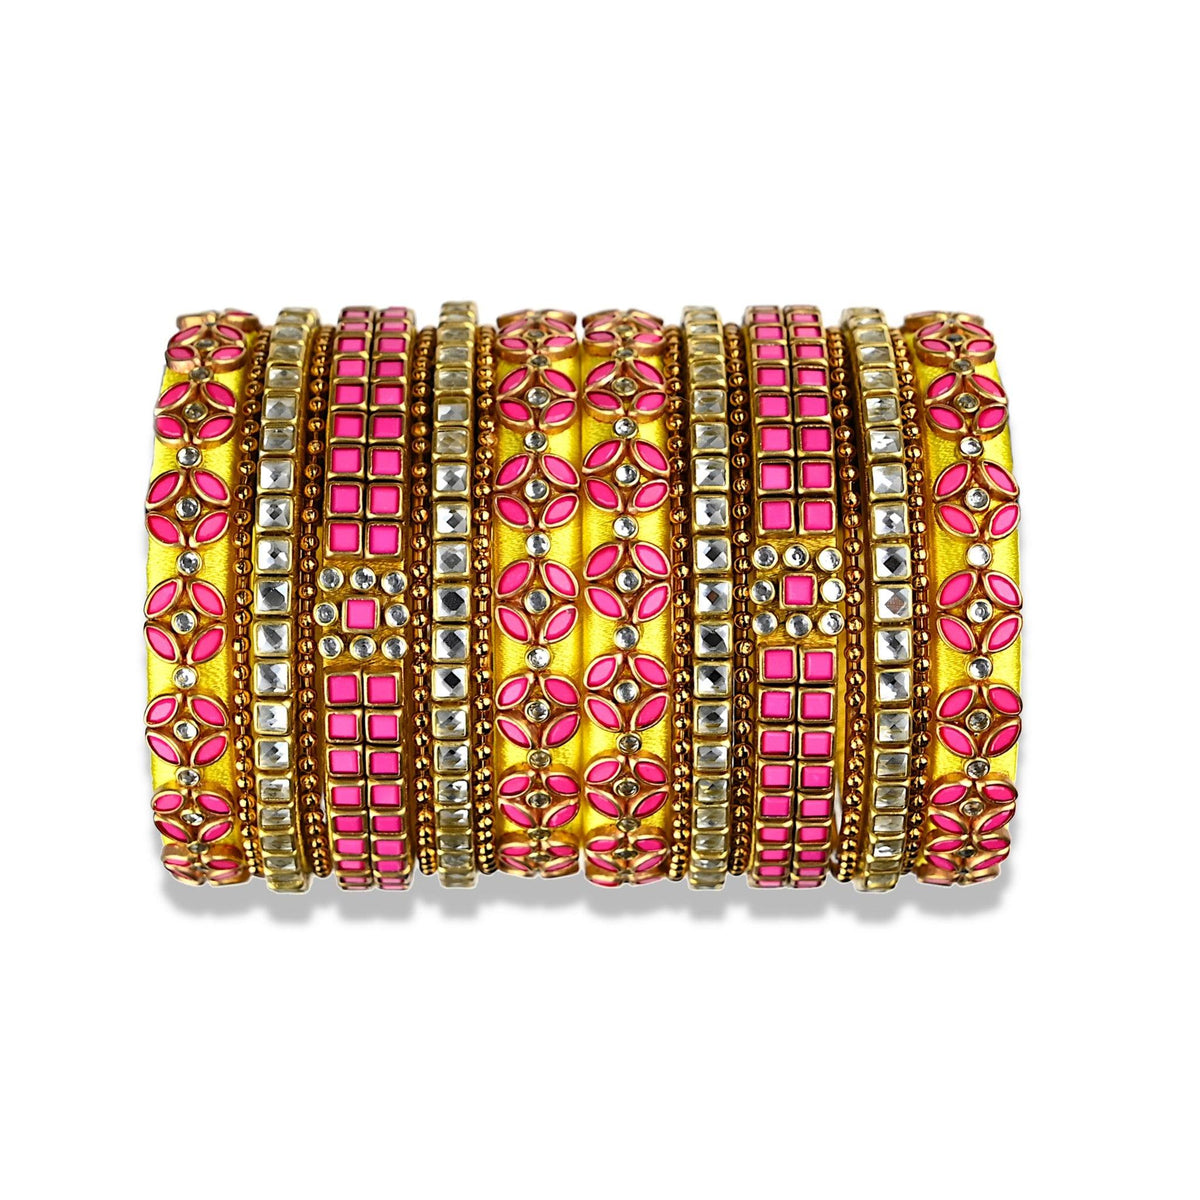 A divine set of silk thread bangles beautifully ornamented with yellow silk thread and pink kundan stone bezels. The bangles comes in a set of 18 with 9 for each hand.